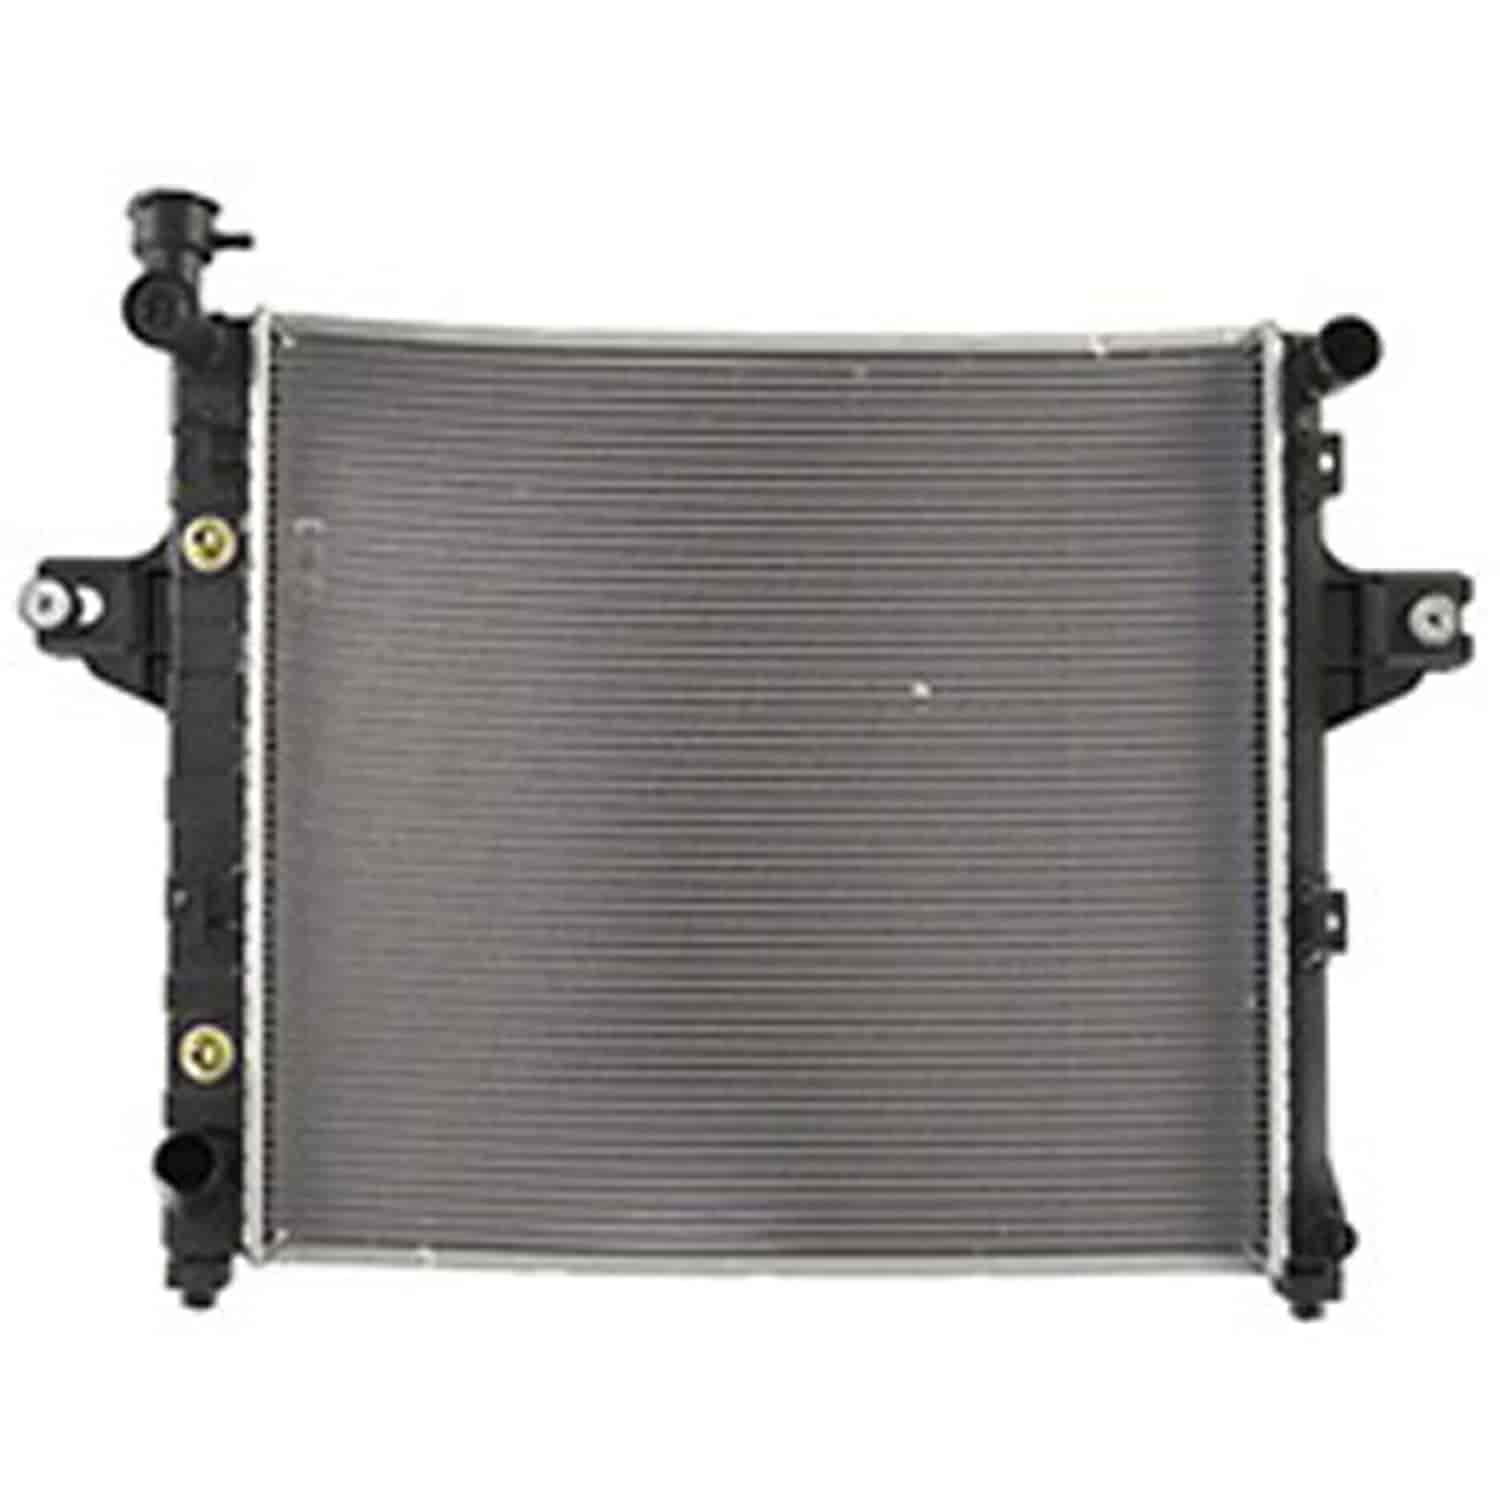 This 1 row radiator from Omix-ADA fits 99-00 Grand Cherokee 4.7L With or Without AC .